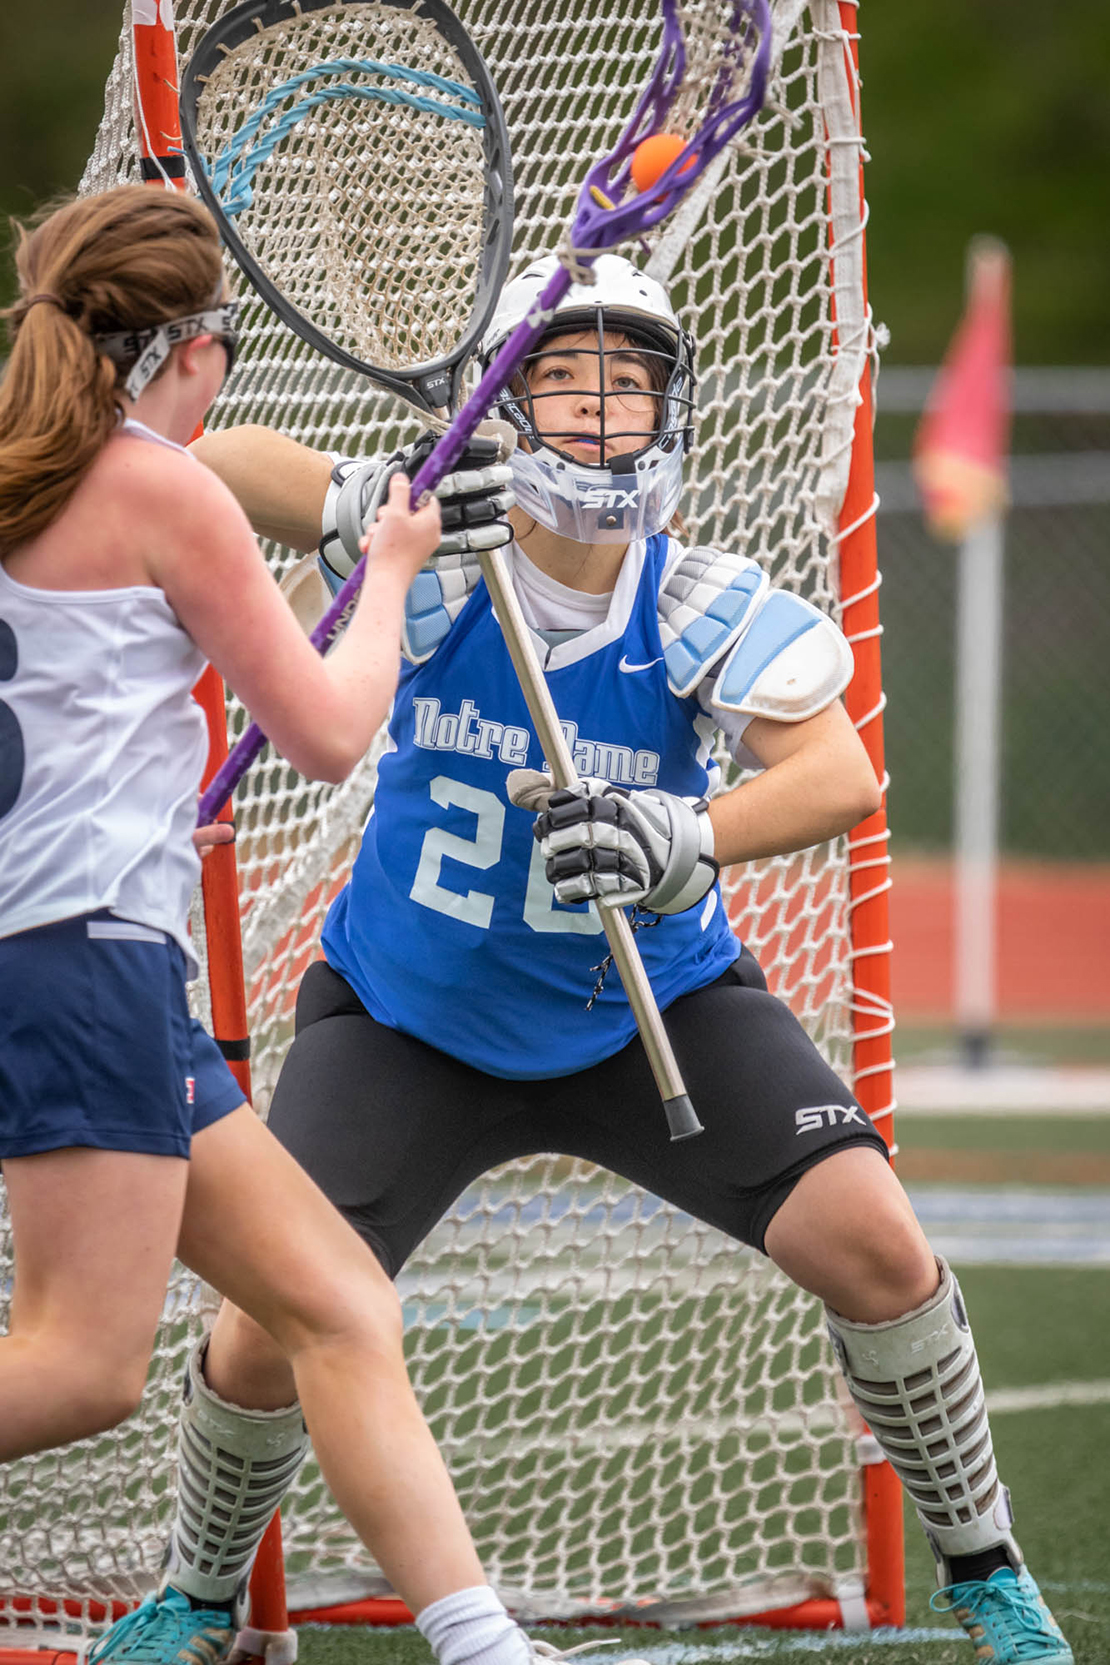 Notre Dame High School goalie Amelia Shaw fended off a shot by Parkway South’s Kayla Huelsmann. Notre Dame won the lacrosse game against Parkway South High School 7-2 at Parkway South High School on April 23.